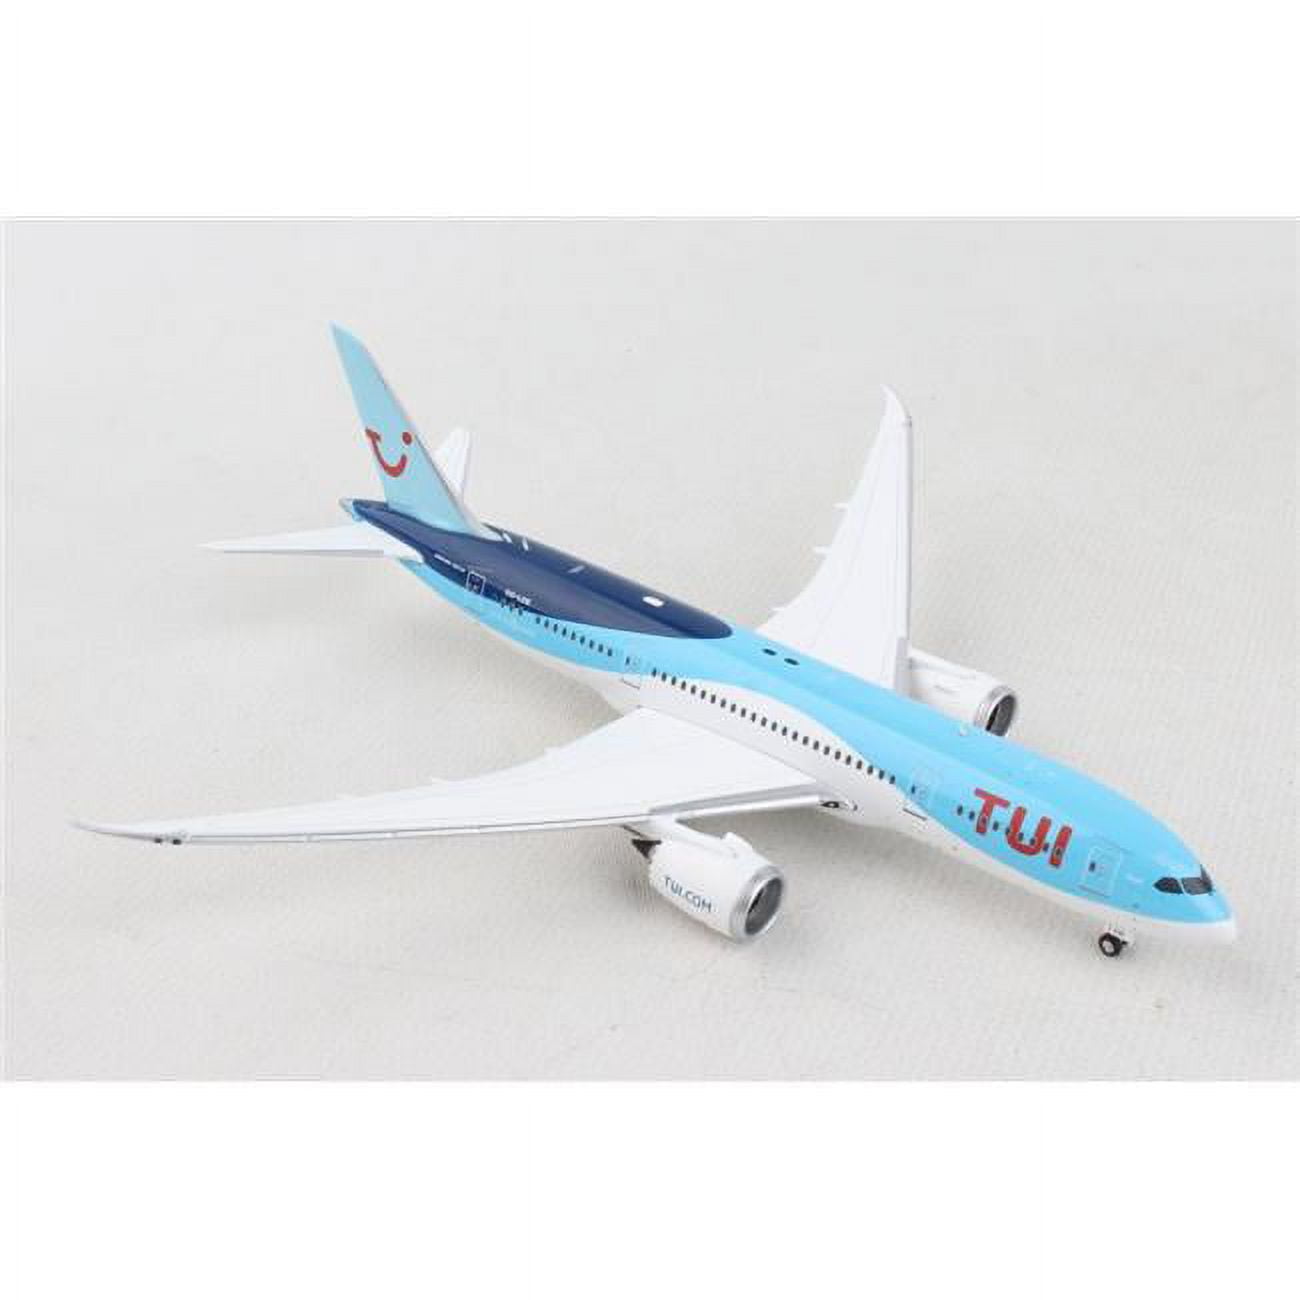 Picture of Phoenix PH2211 1-400 Scale Registration No.OO-LOE Belgium Phoenix Tuifly 787-8 Model Aircraft Toy